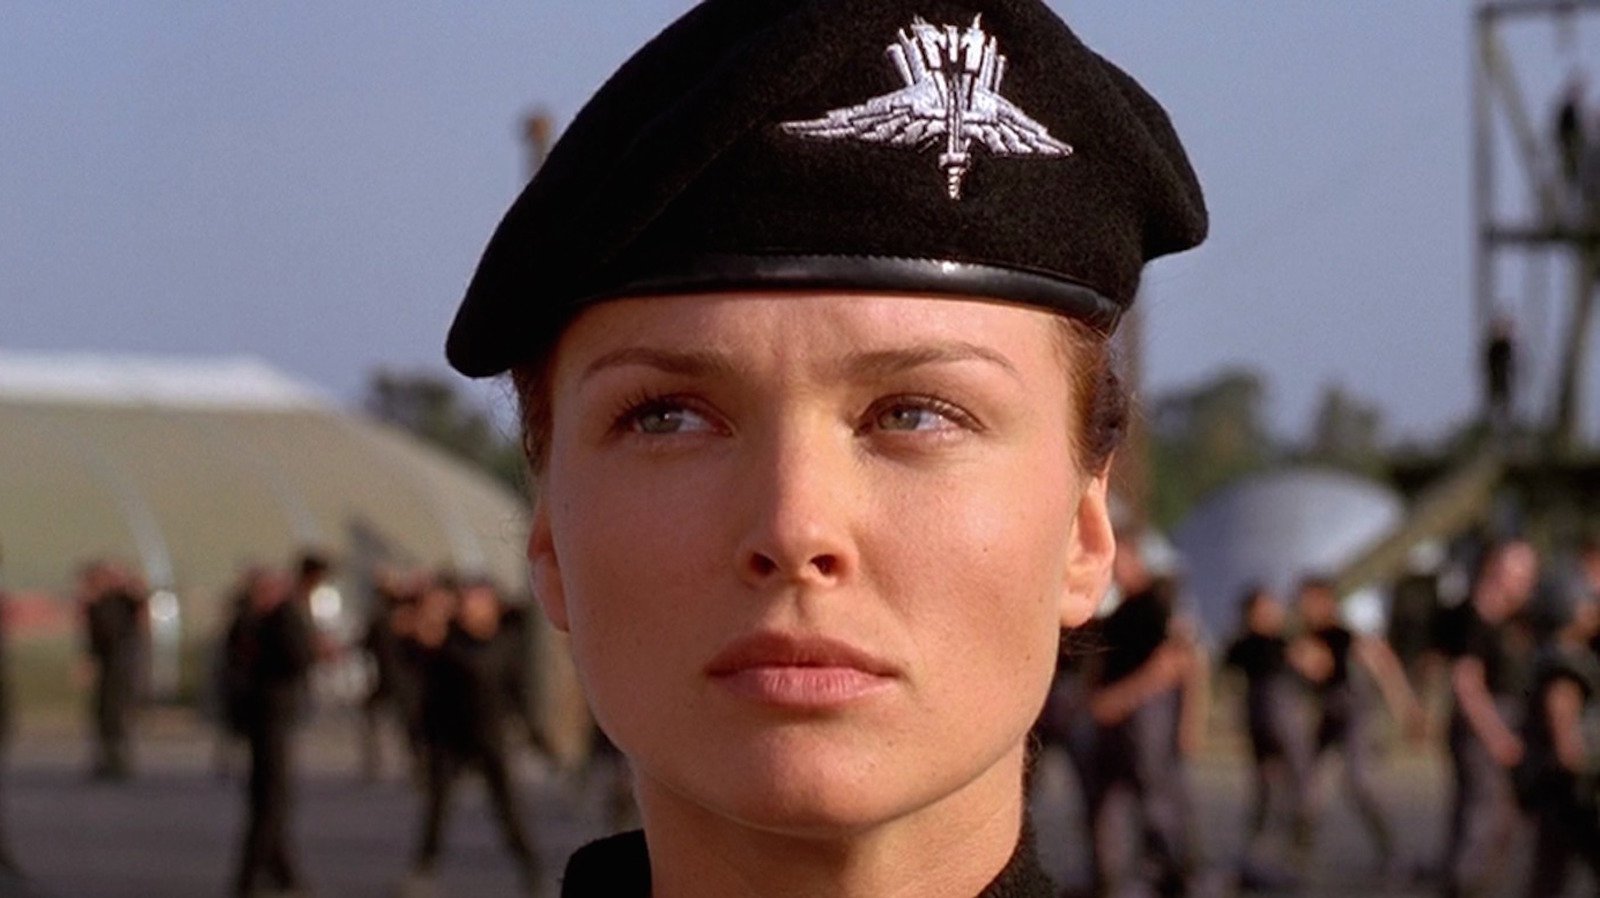 The Starship Troopers Movie Trilogy You've Never Seen